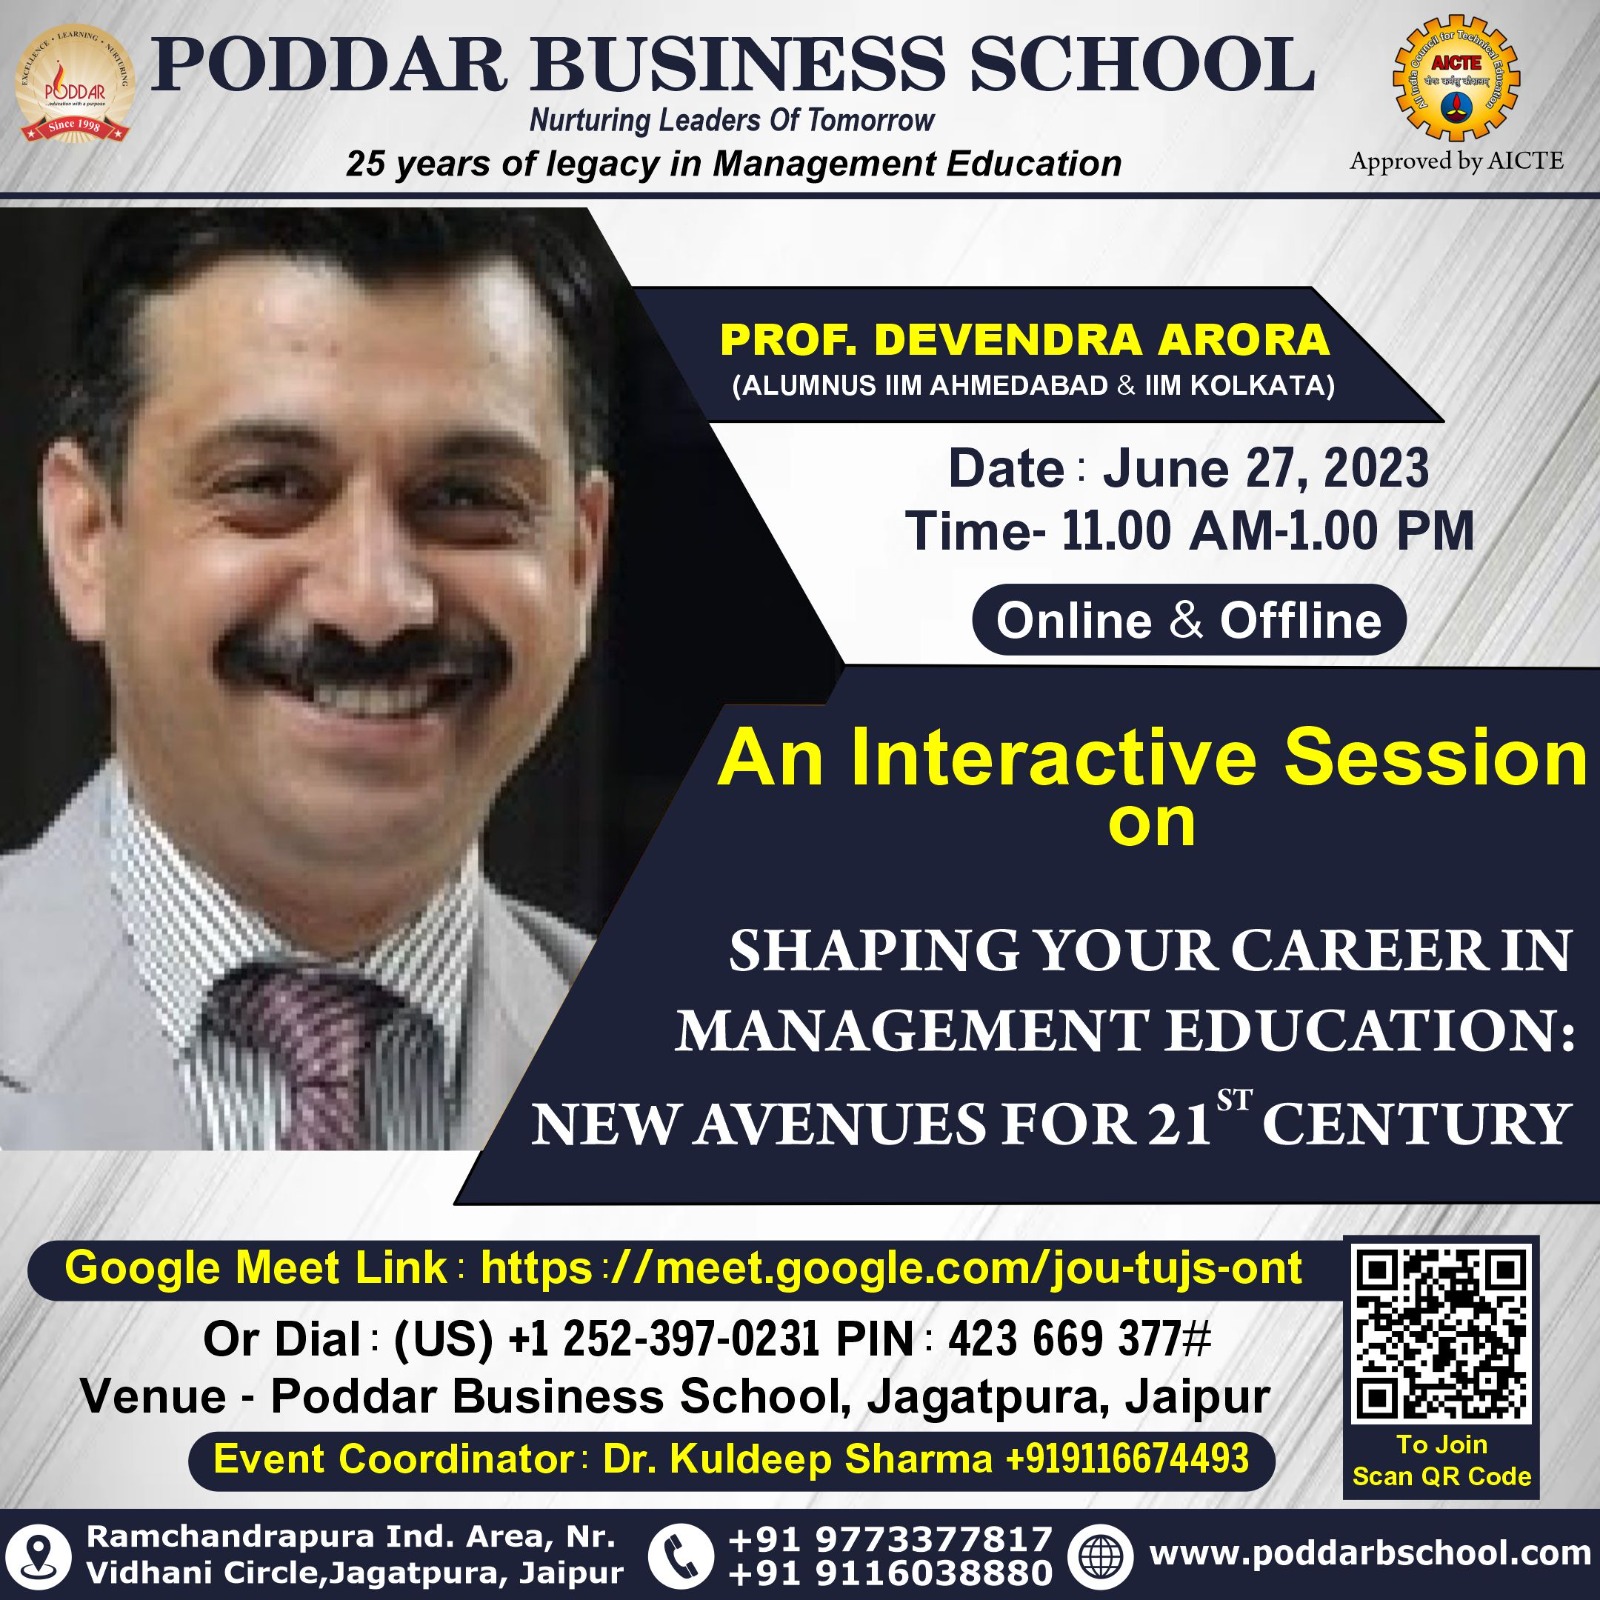 PBS is organising a webinar and seminar for all the management aspirants on the topic “Shaping your career in management education”